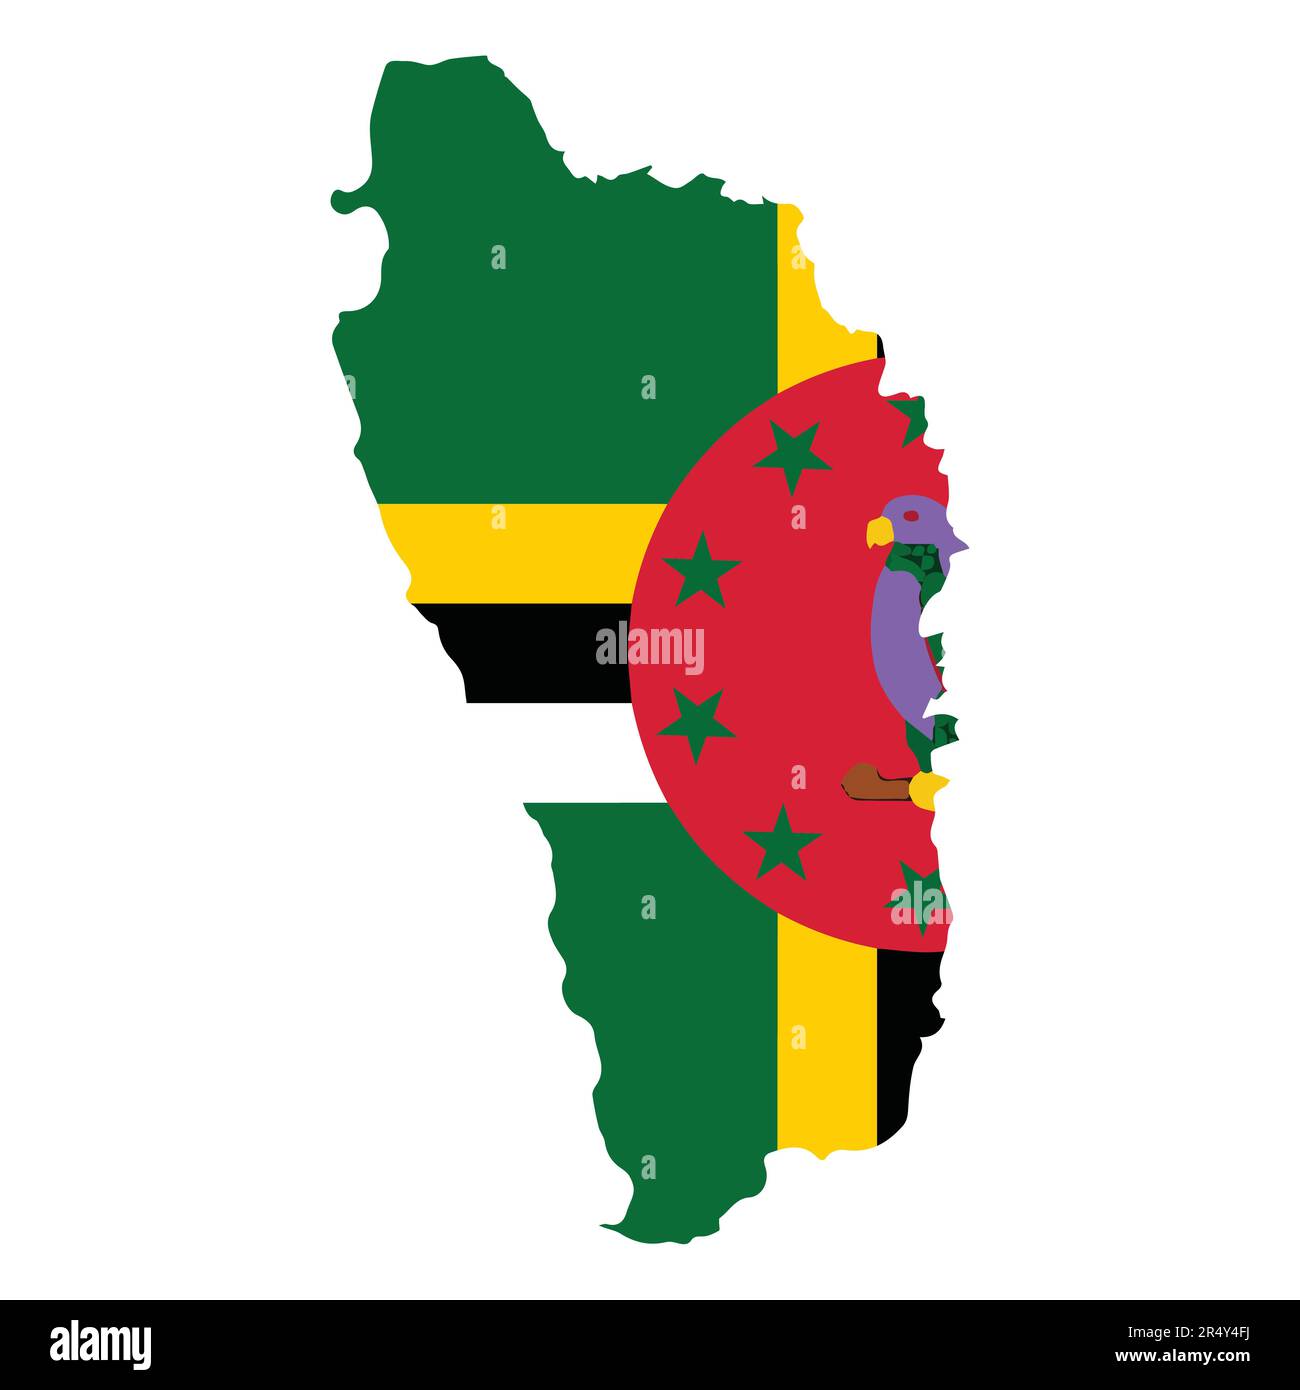 Dominica Country in the Caribbean vector illustration flag and map logo ...